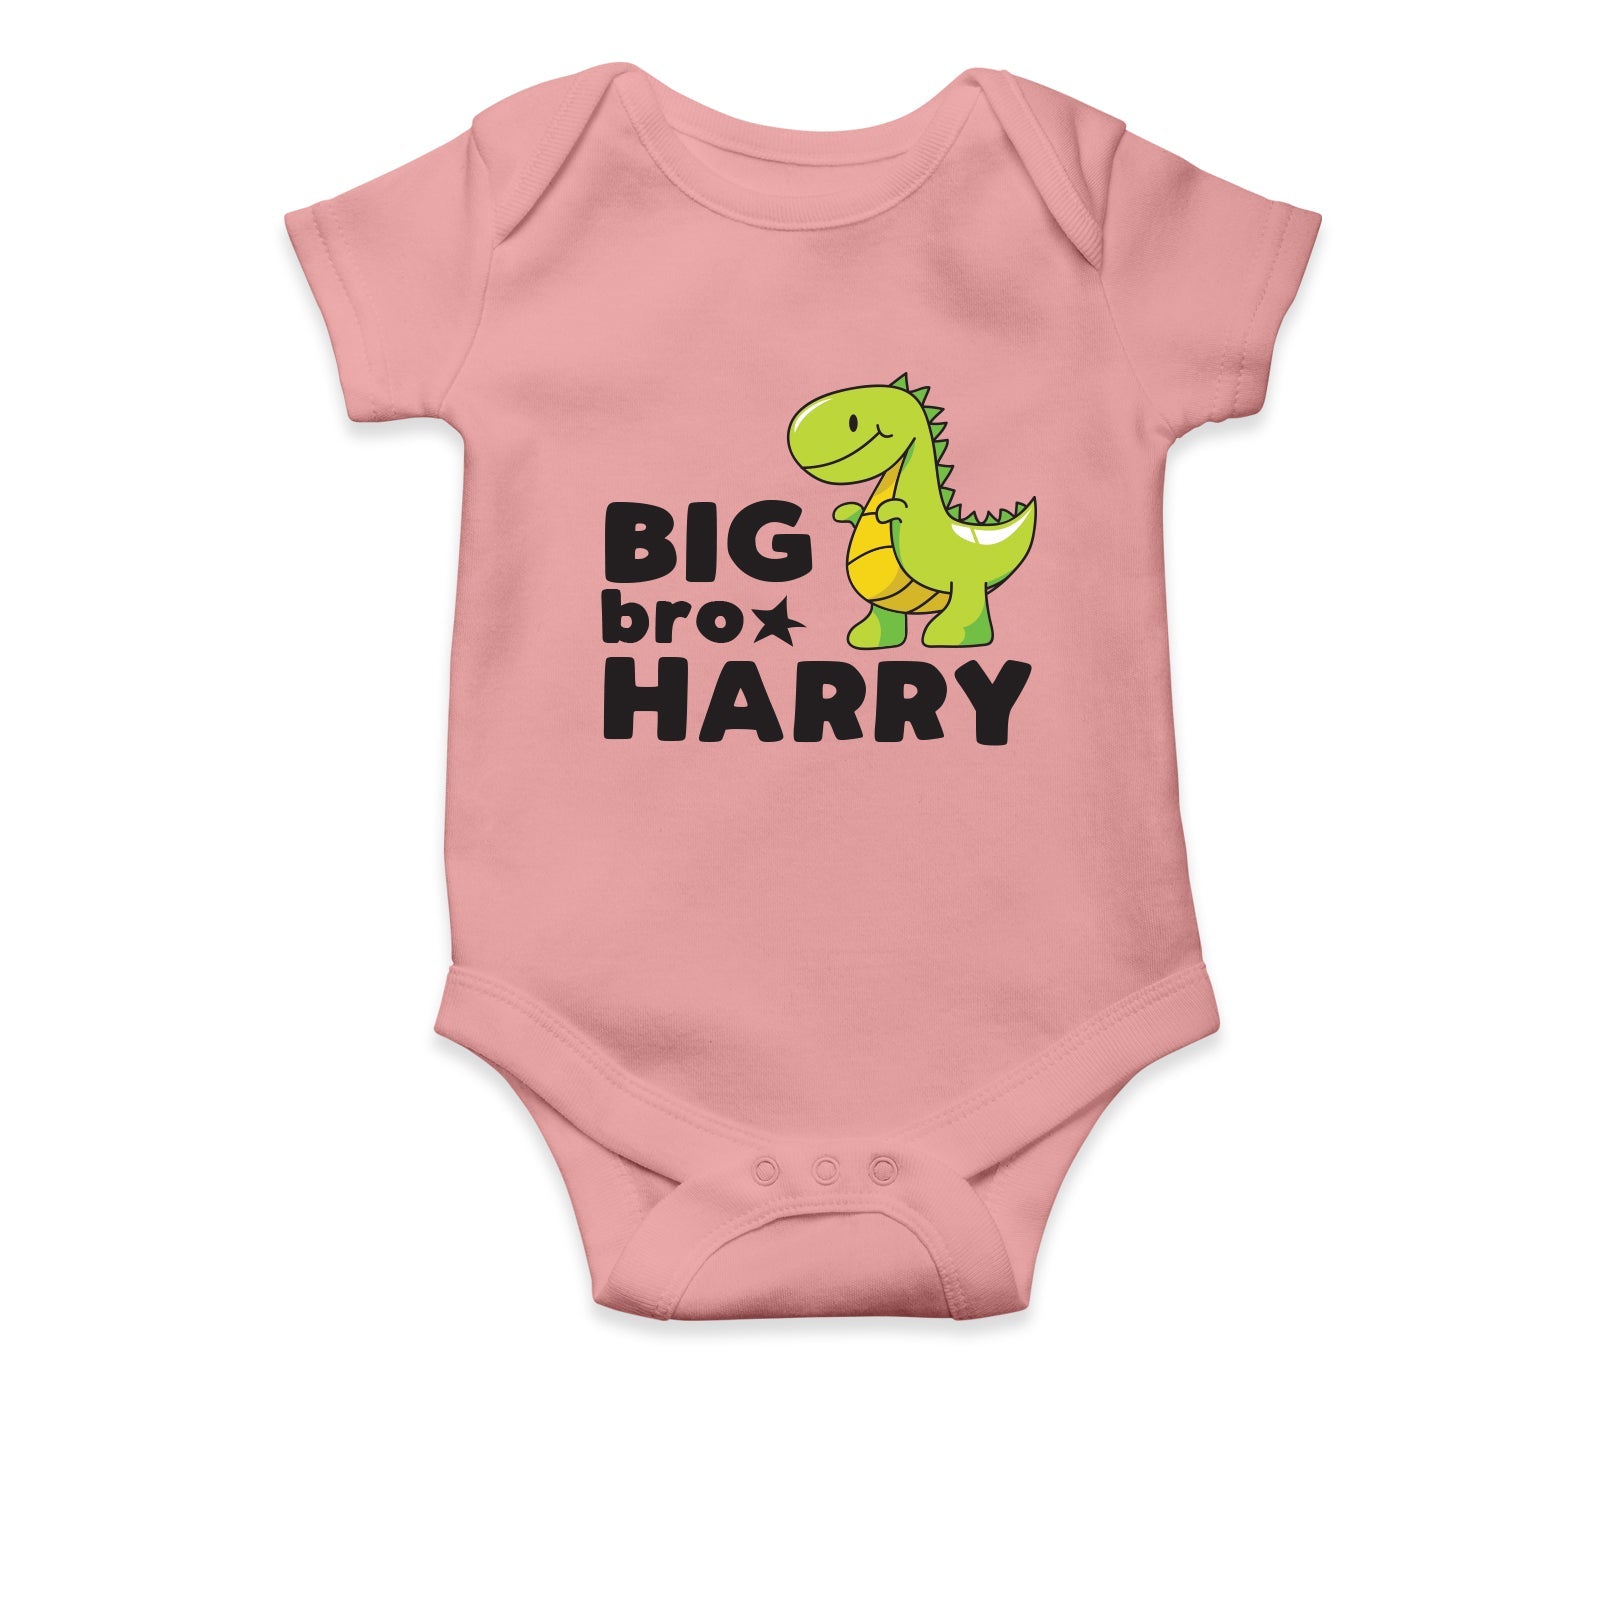 Personalised White Baby Body Suit Grow Vest - Dino